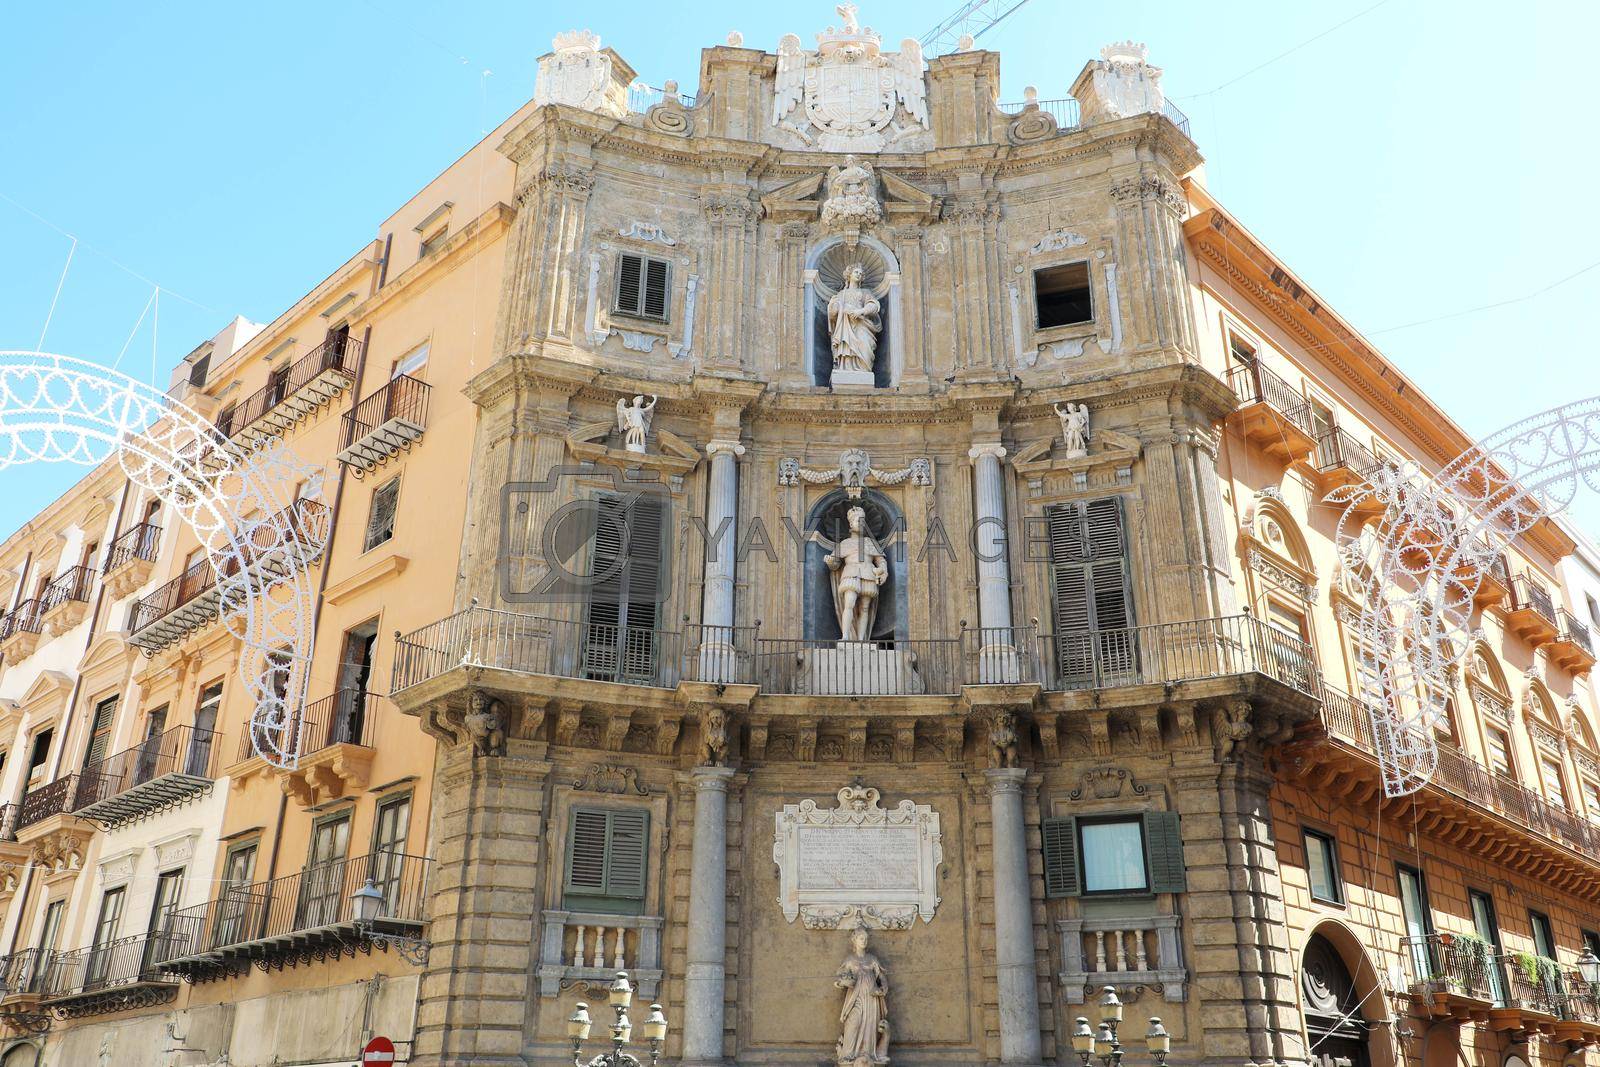 PALERMO, ITALY - JULY 05, 2020: Quattro Canti (four corners) in Palermo, Sicily, Italy